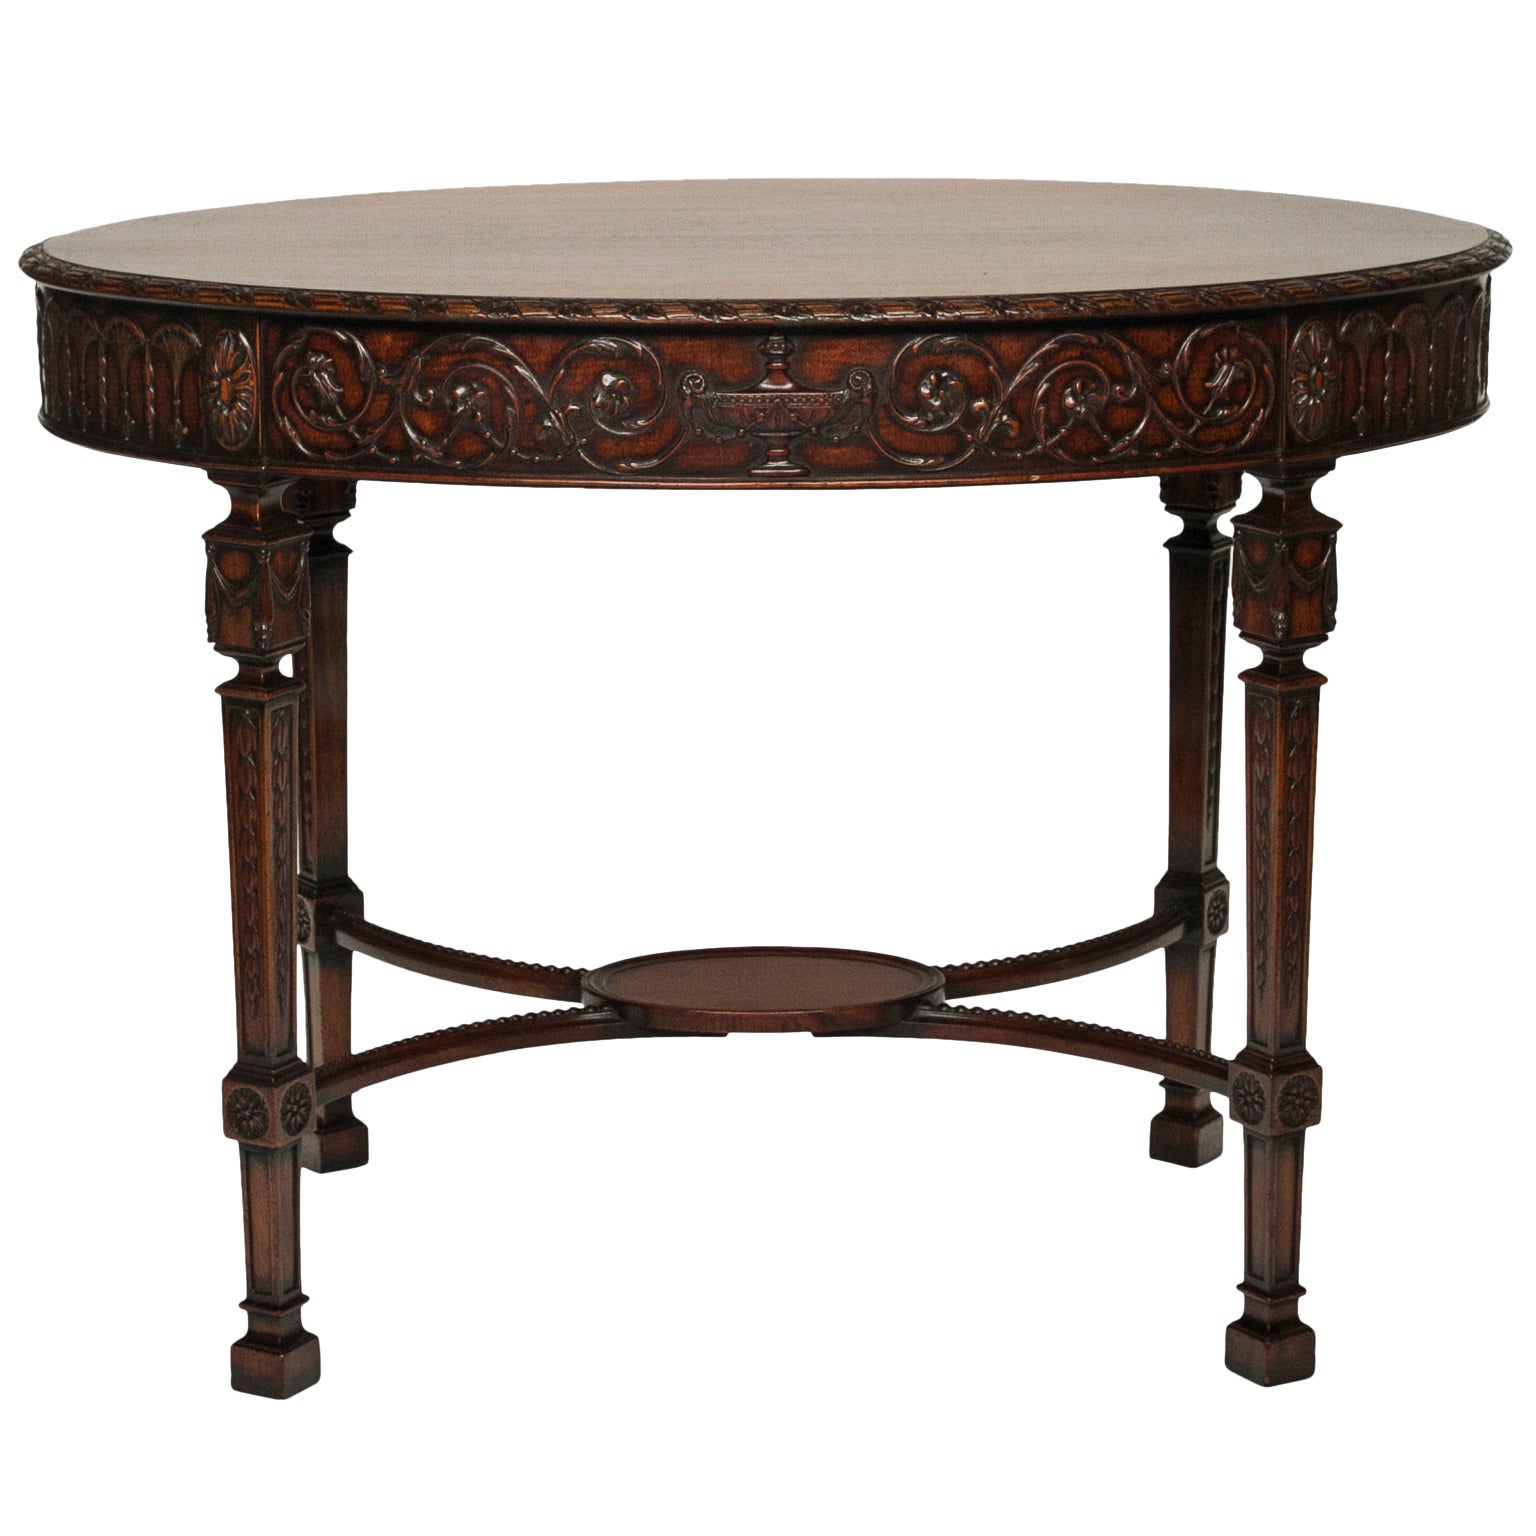 19th Century Oval Sheraton Style Centre Table